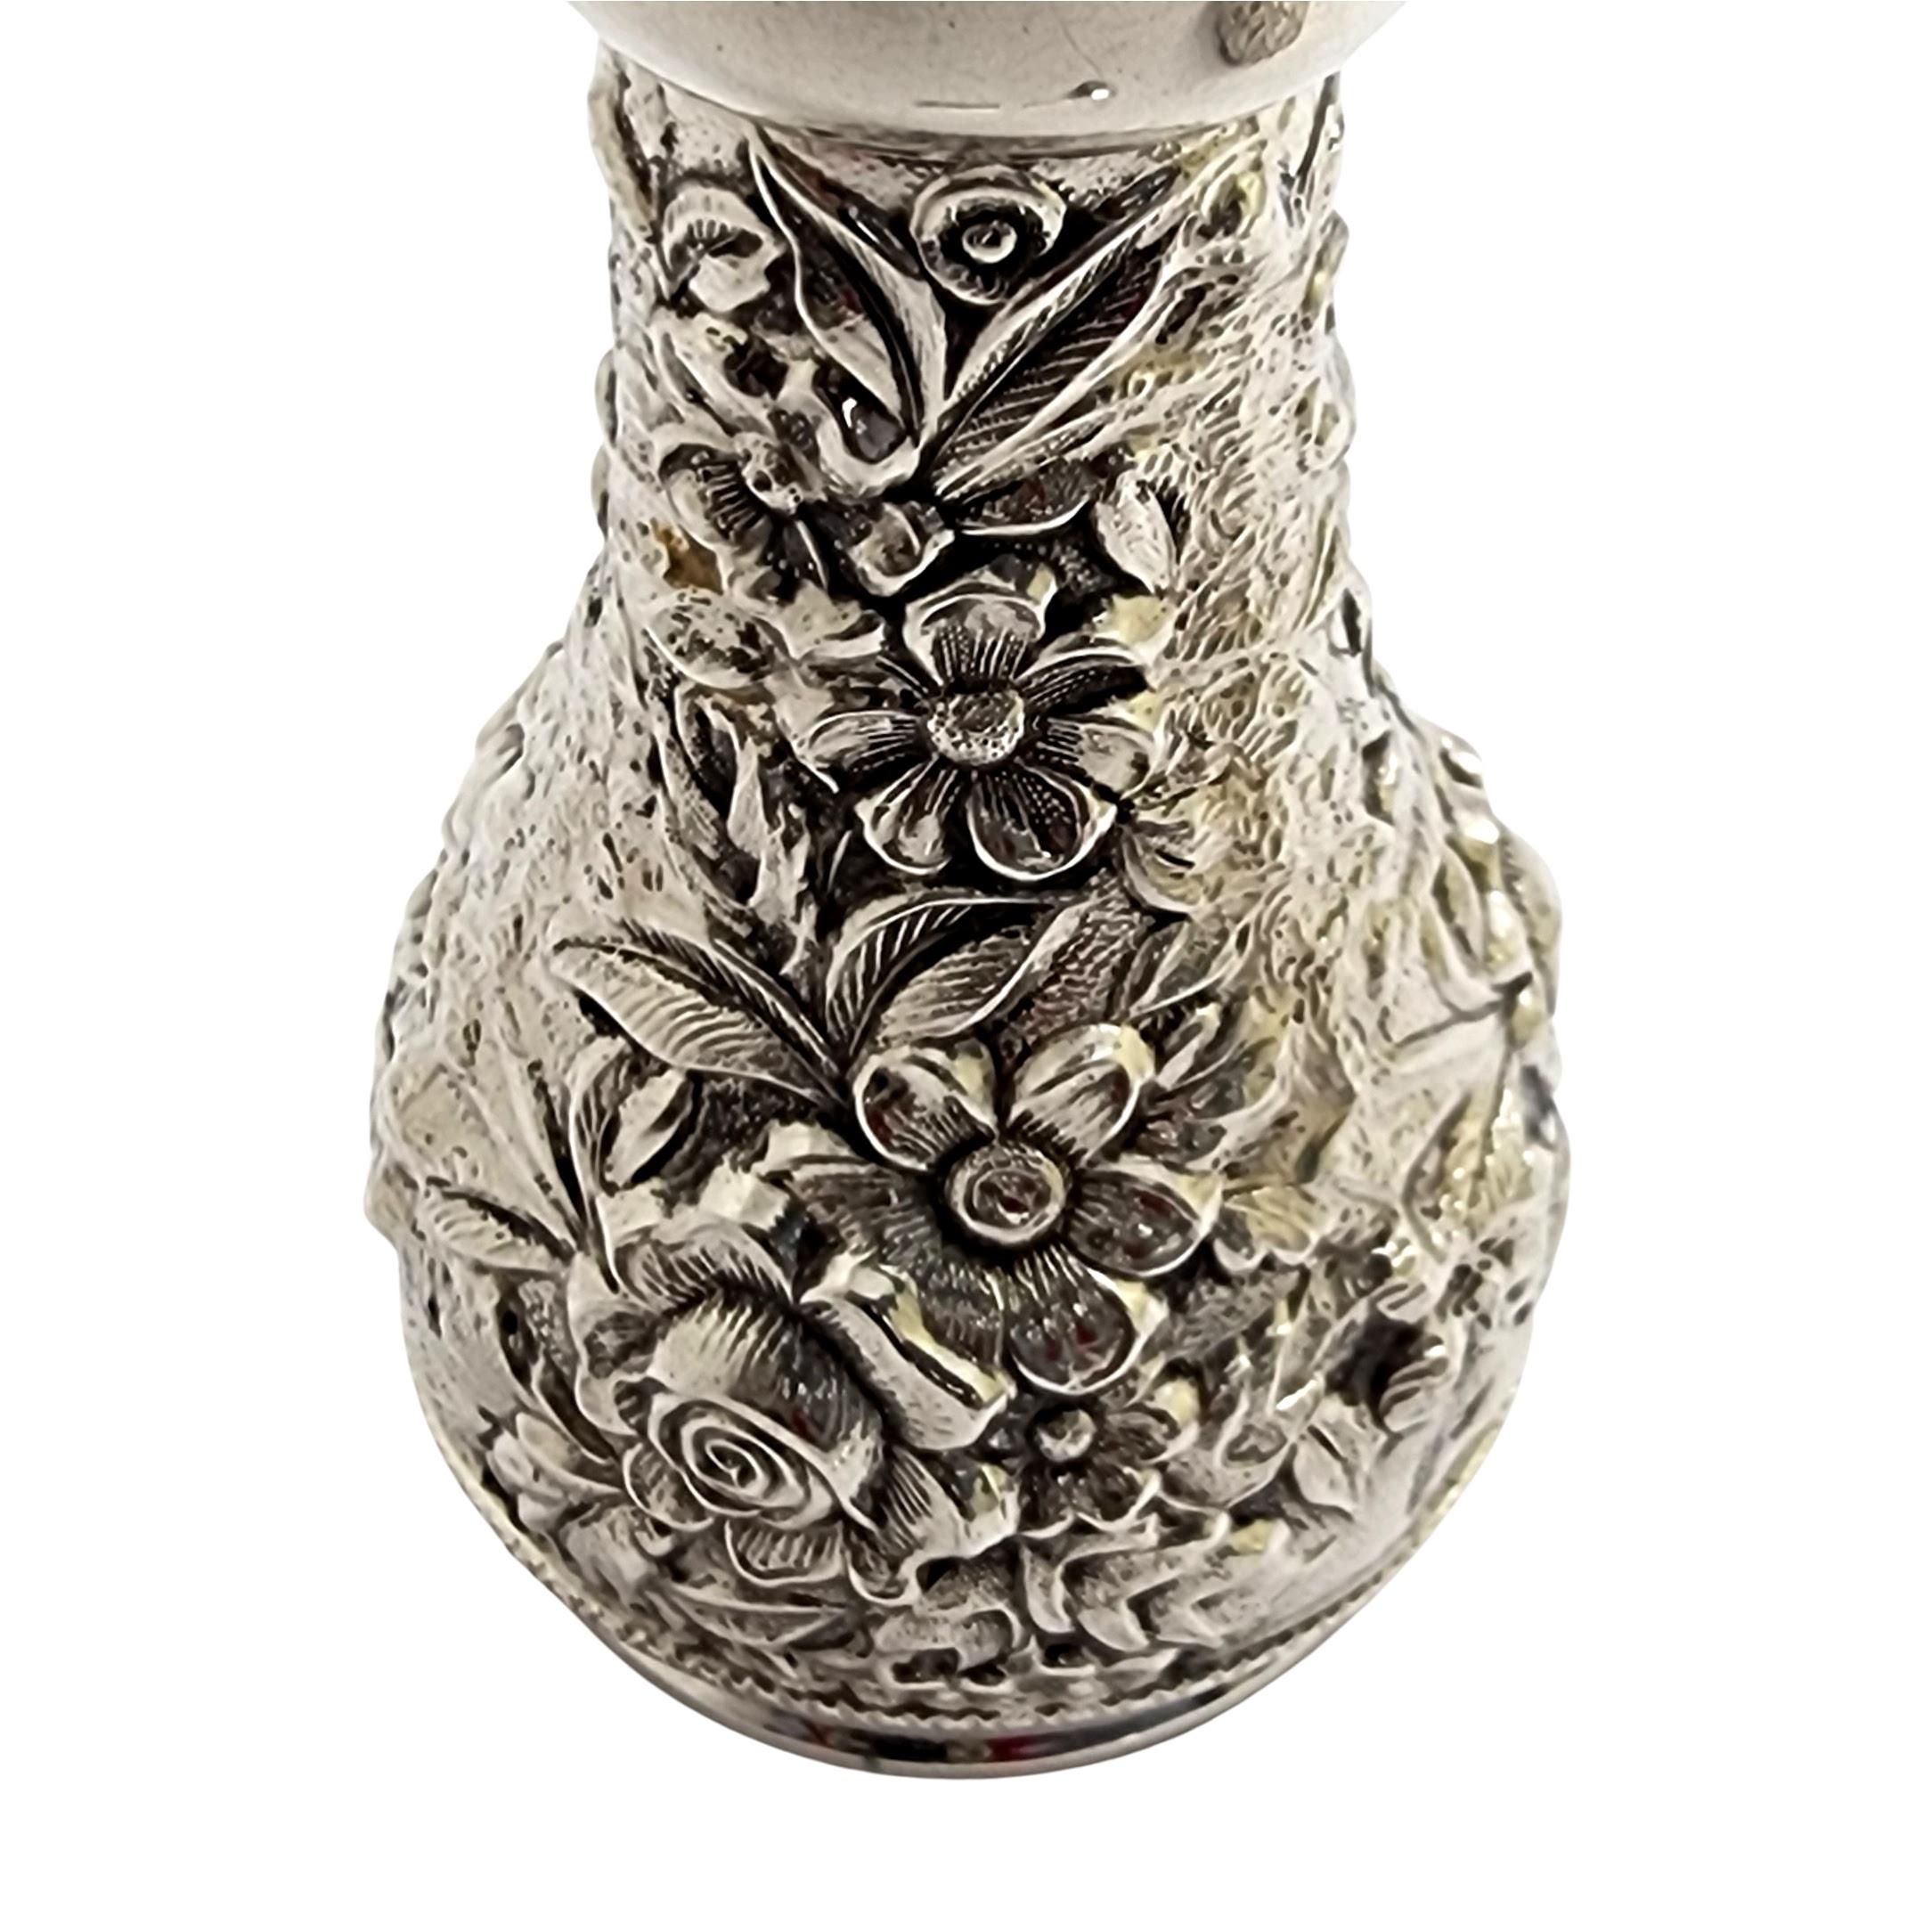 S Kirk & Son Sterling 59A Repousse Salt Cellar with Spoon and Pepper Shaker 5